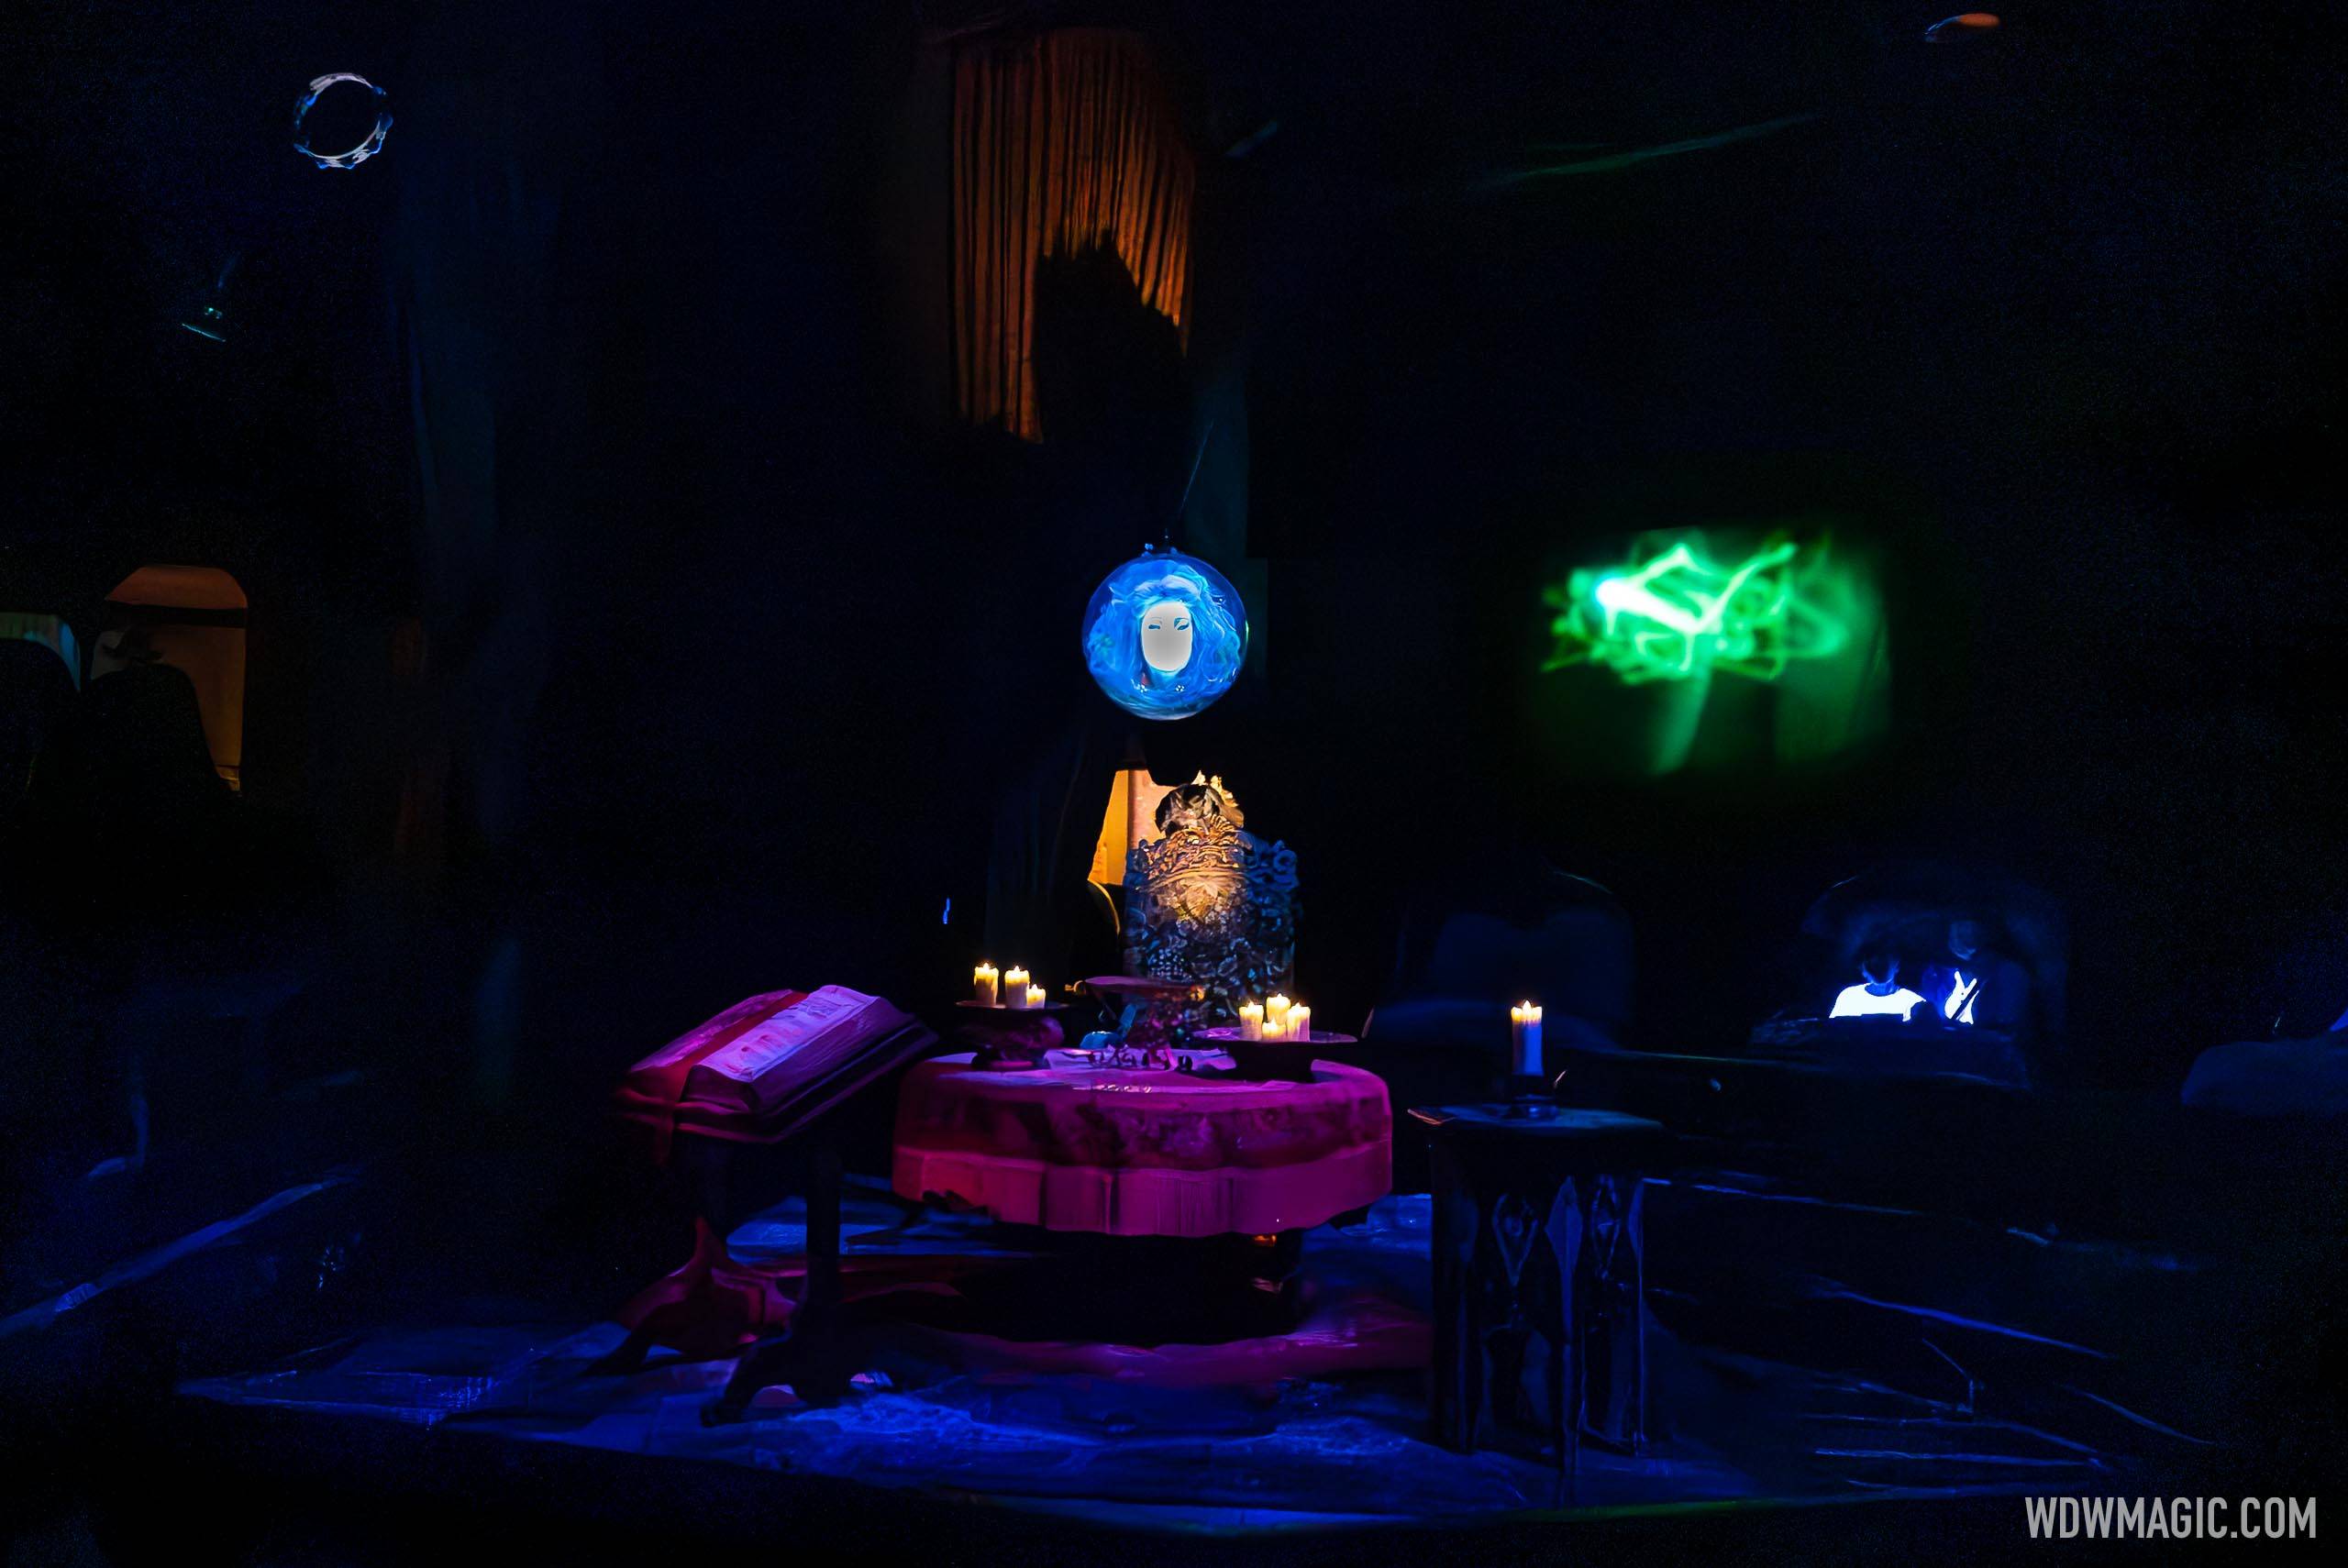 VIDEO - A behind-the-scenes look at the new Hitchhiking Ghosts scene with Walt Disney Imagineering